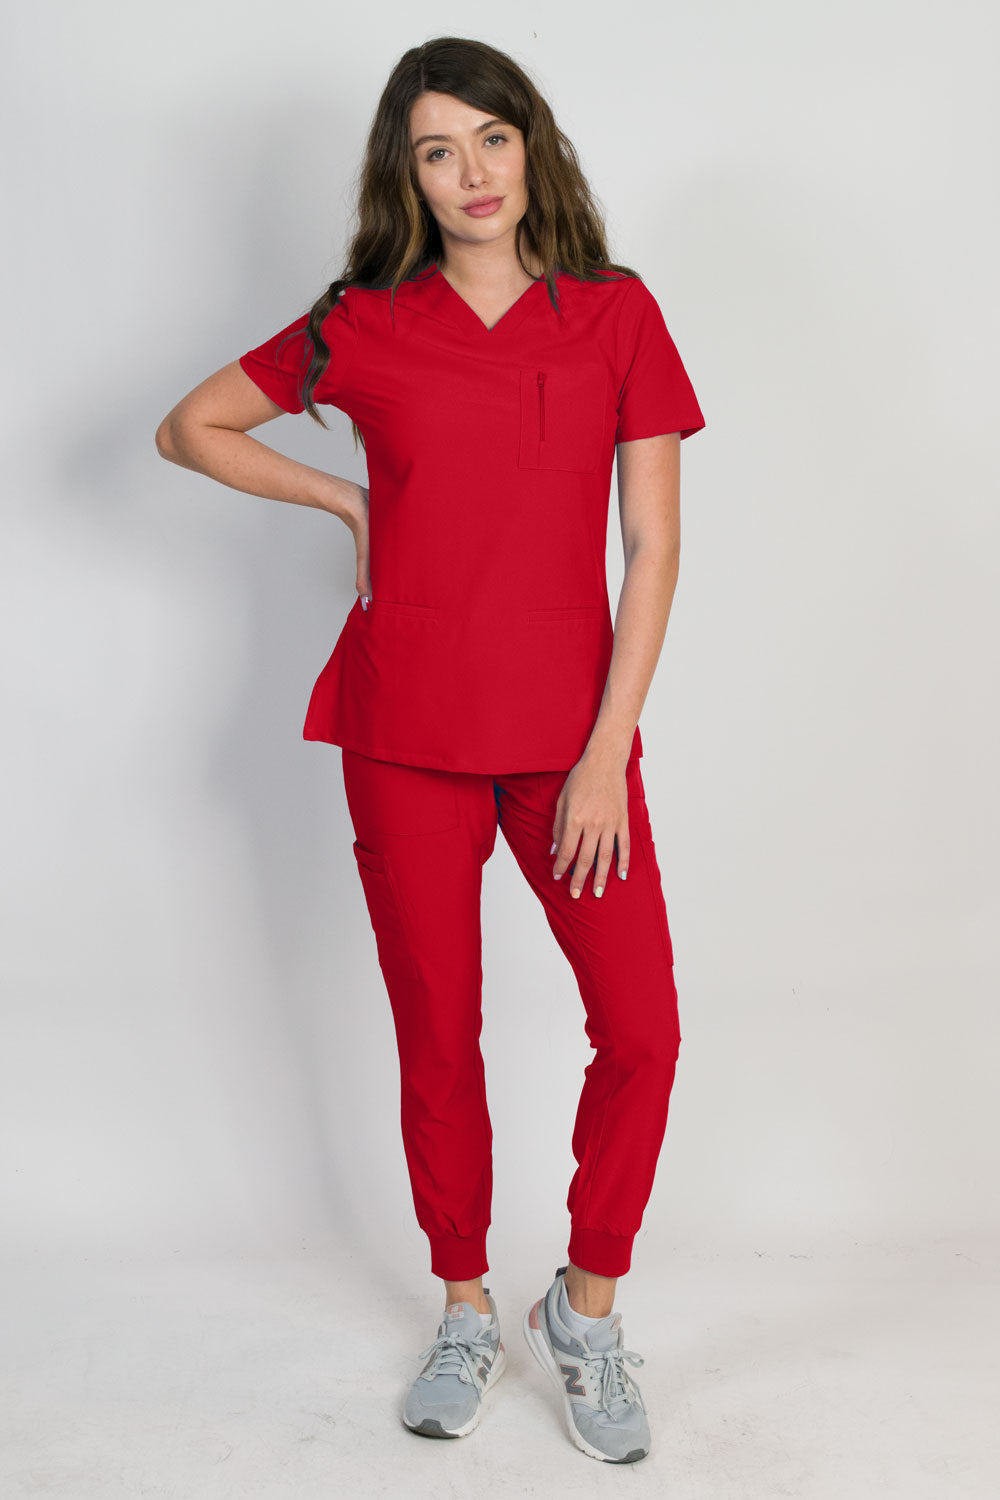 Fleur Women's Stretch Scrub Set with Zip Chest Pocket Top and Knit